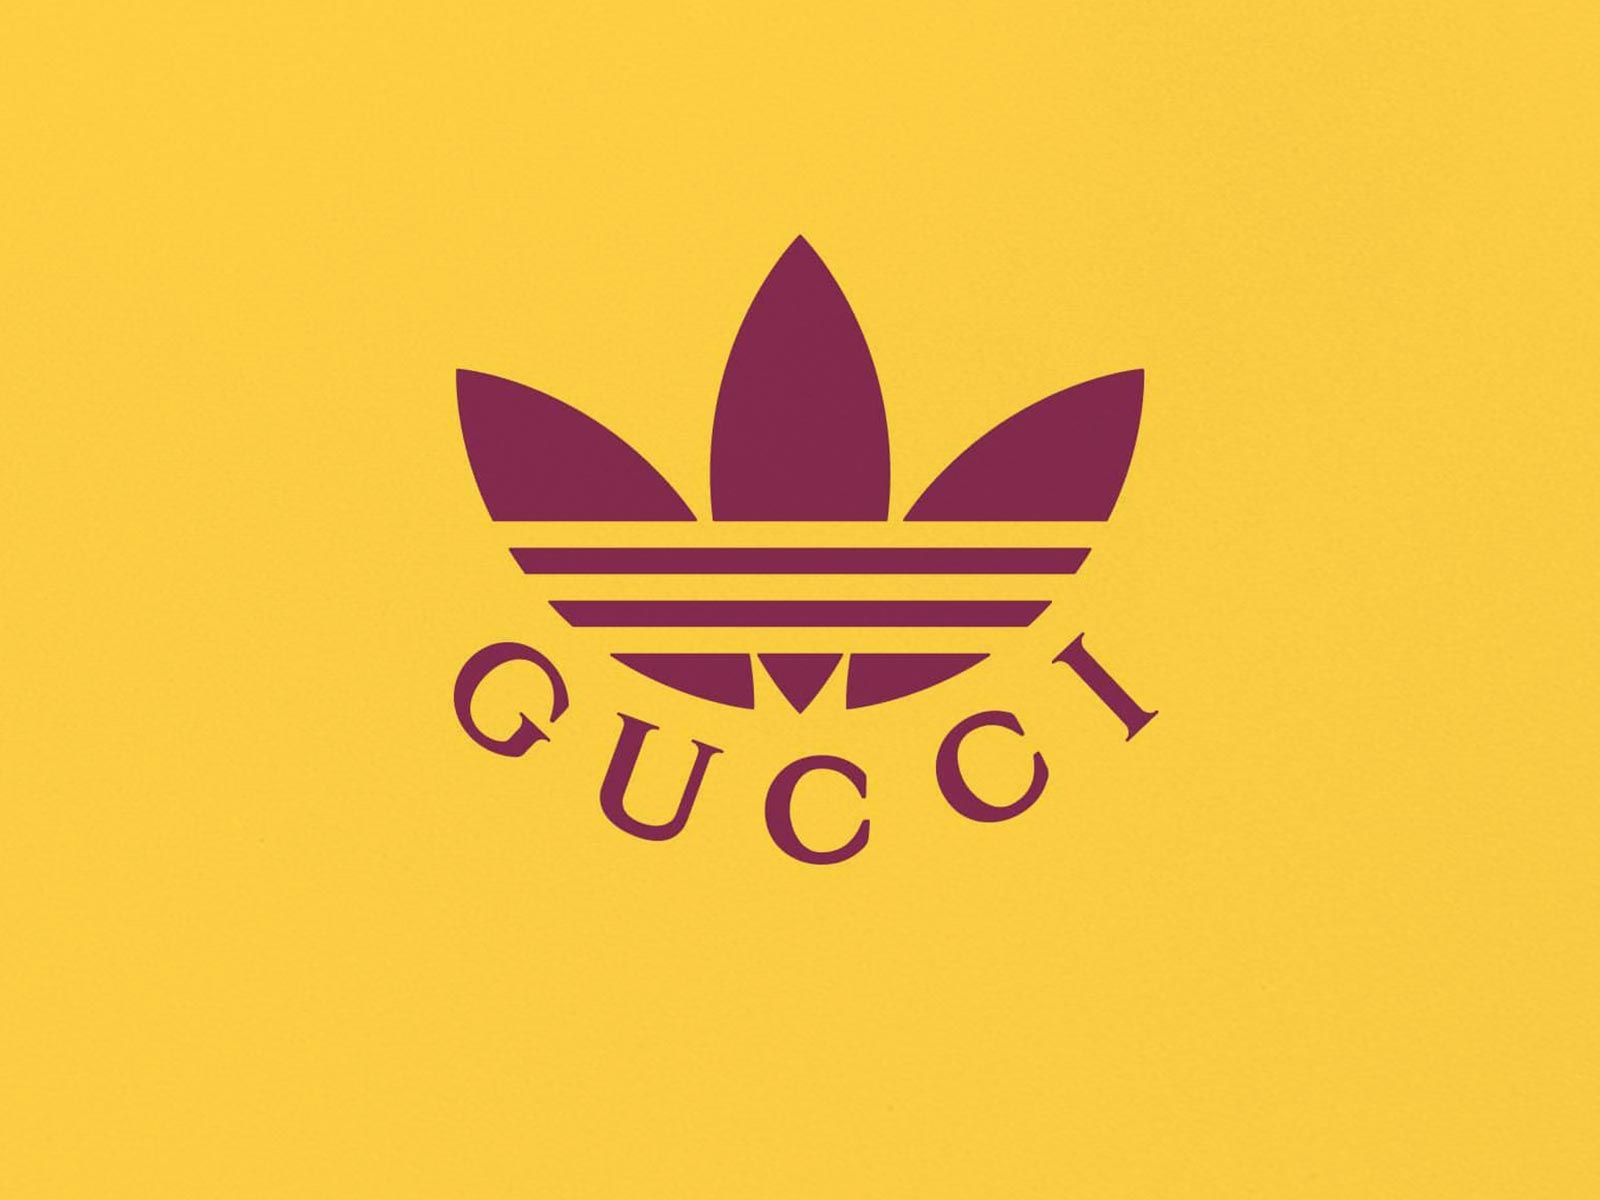 adidas x Gucci update their apparel selection